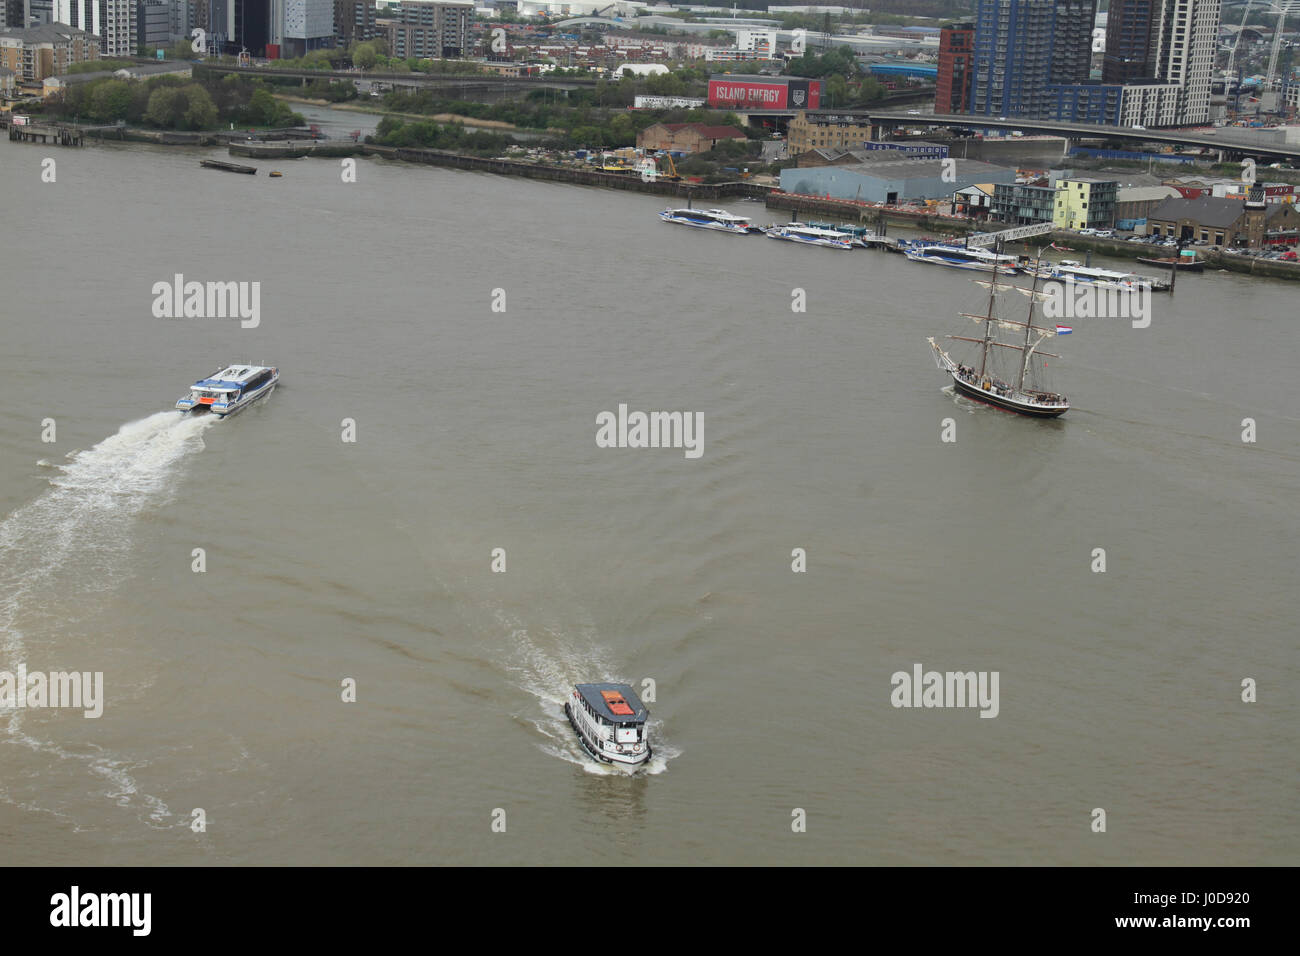 London, United Kingdom - April 12: A vessel sails around the O2 Arena on the river Thames ahead of the Tall Ships regetta 2017, where around 40 Tall Ships are scheduled to sail the river Thames to Greenwich, marking the 150th anniversary of the Canadian Confederation. Over the Easter weekend, on 13 to 16 April 2017, the ships will be anchored at the Maritime Greenwich UNESCO World Heritage Site in Greenwich town centre, and at the Royal Arsenal Riverside in Woolwich before they sail to Quebec, Canada, via Portugal, Bermuda and Boston. © David Mbiyu/Alamy Live News Stock Photo